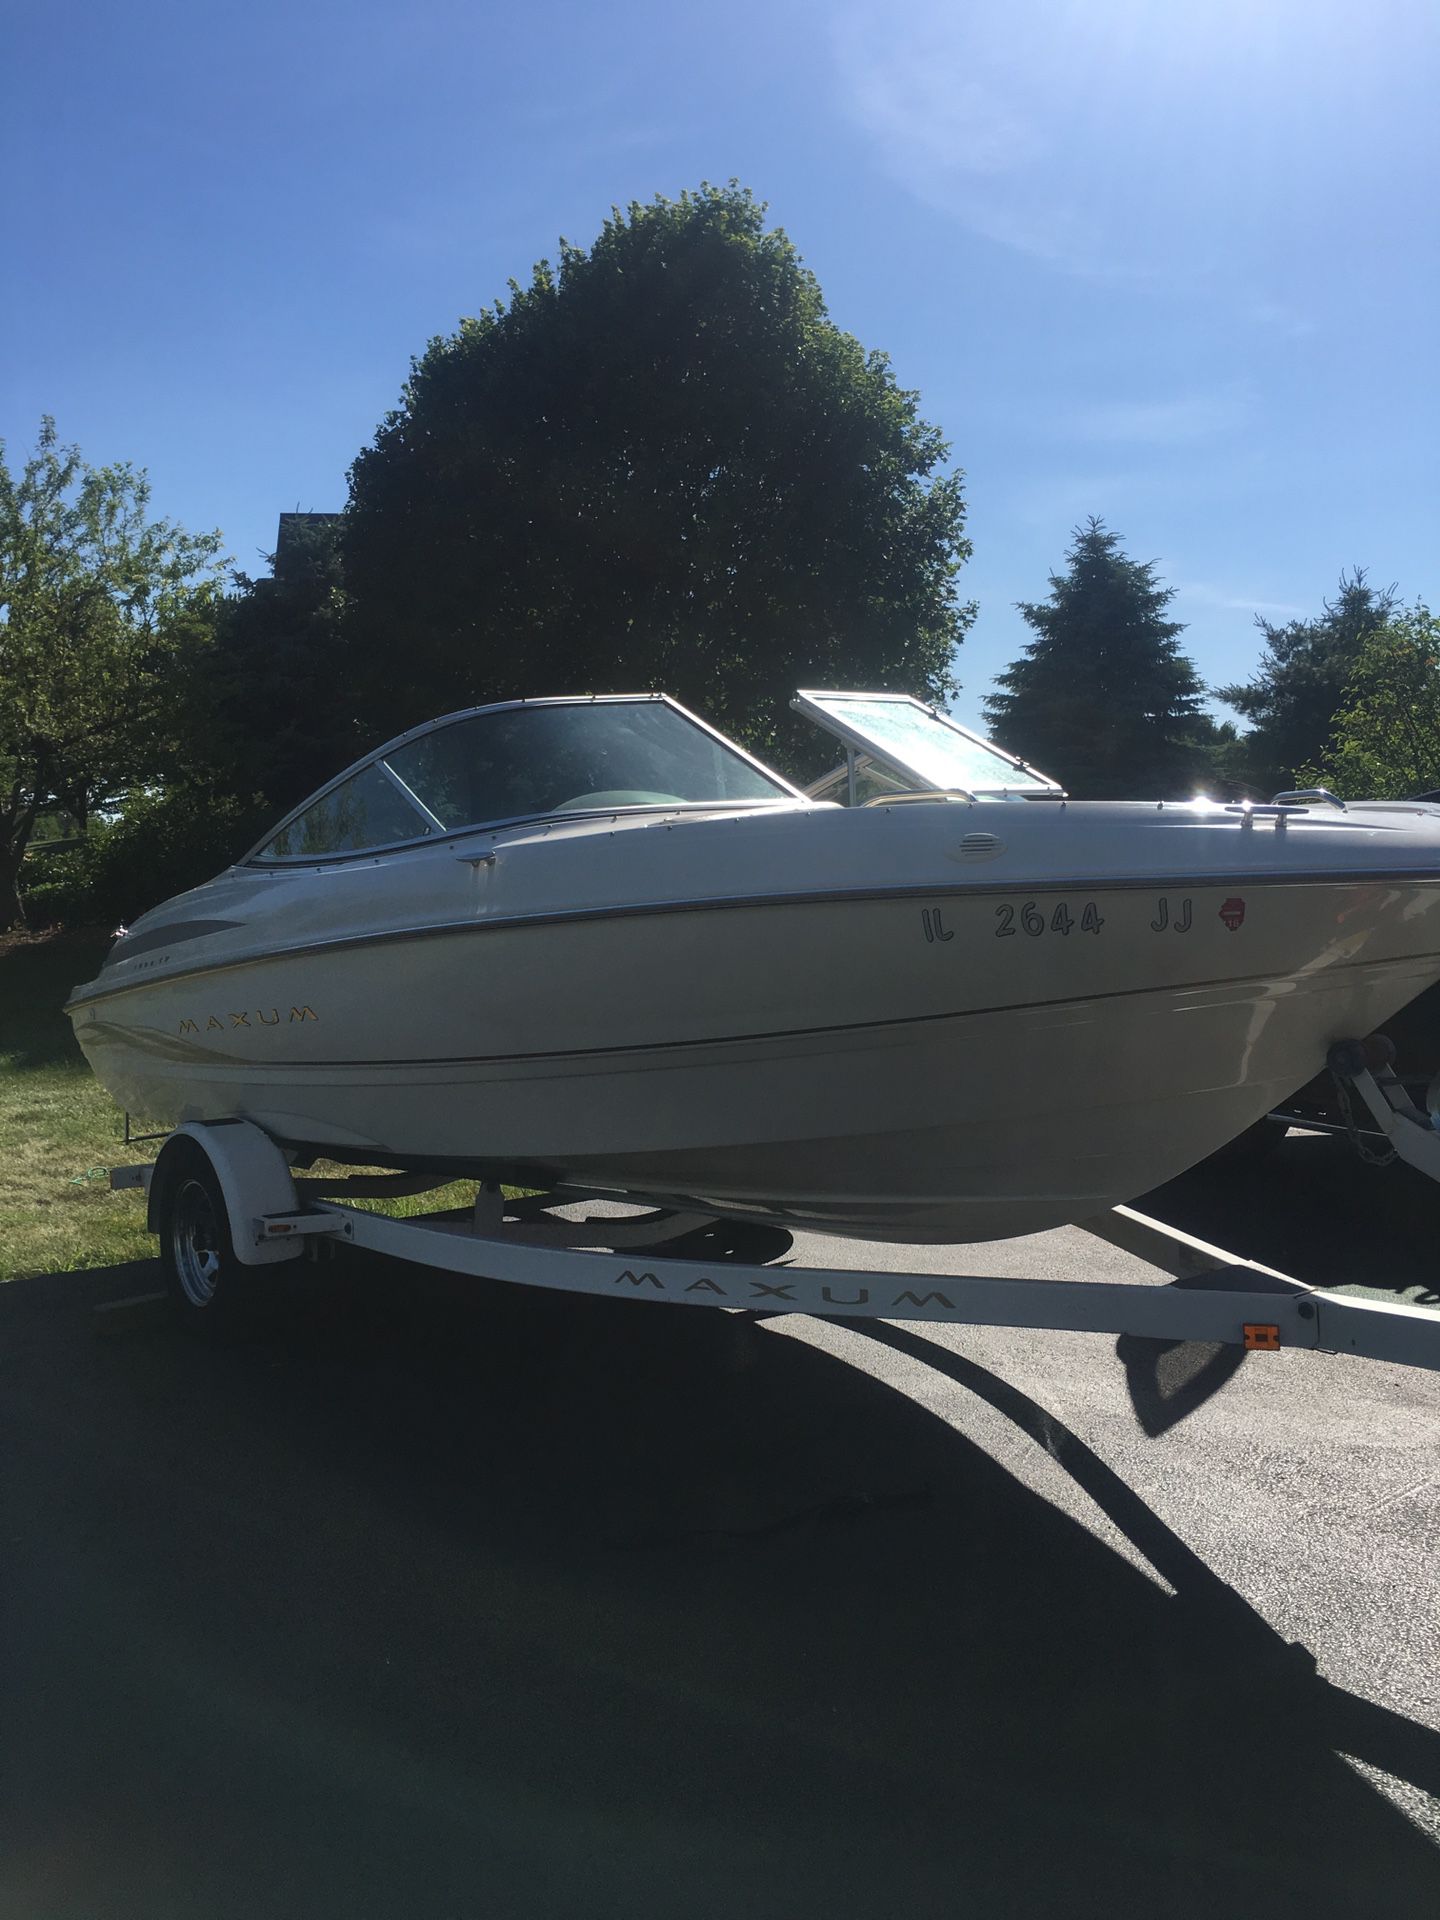 2000 Maxum 19 ft. boat with a Mercury motor.